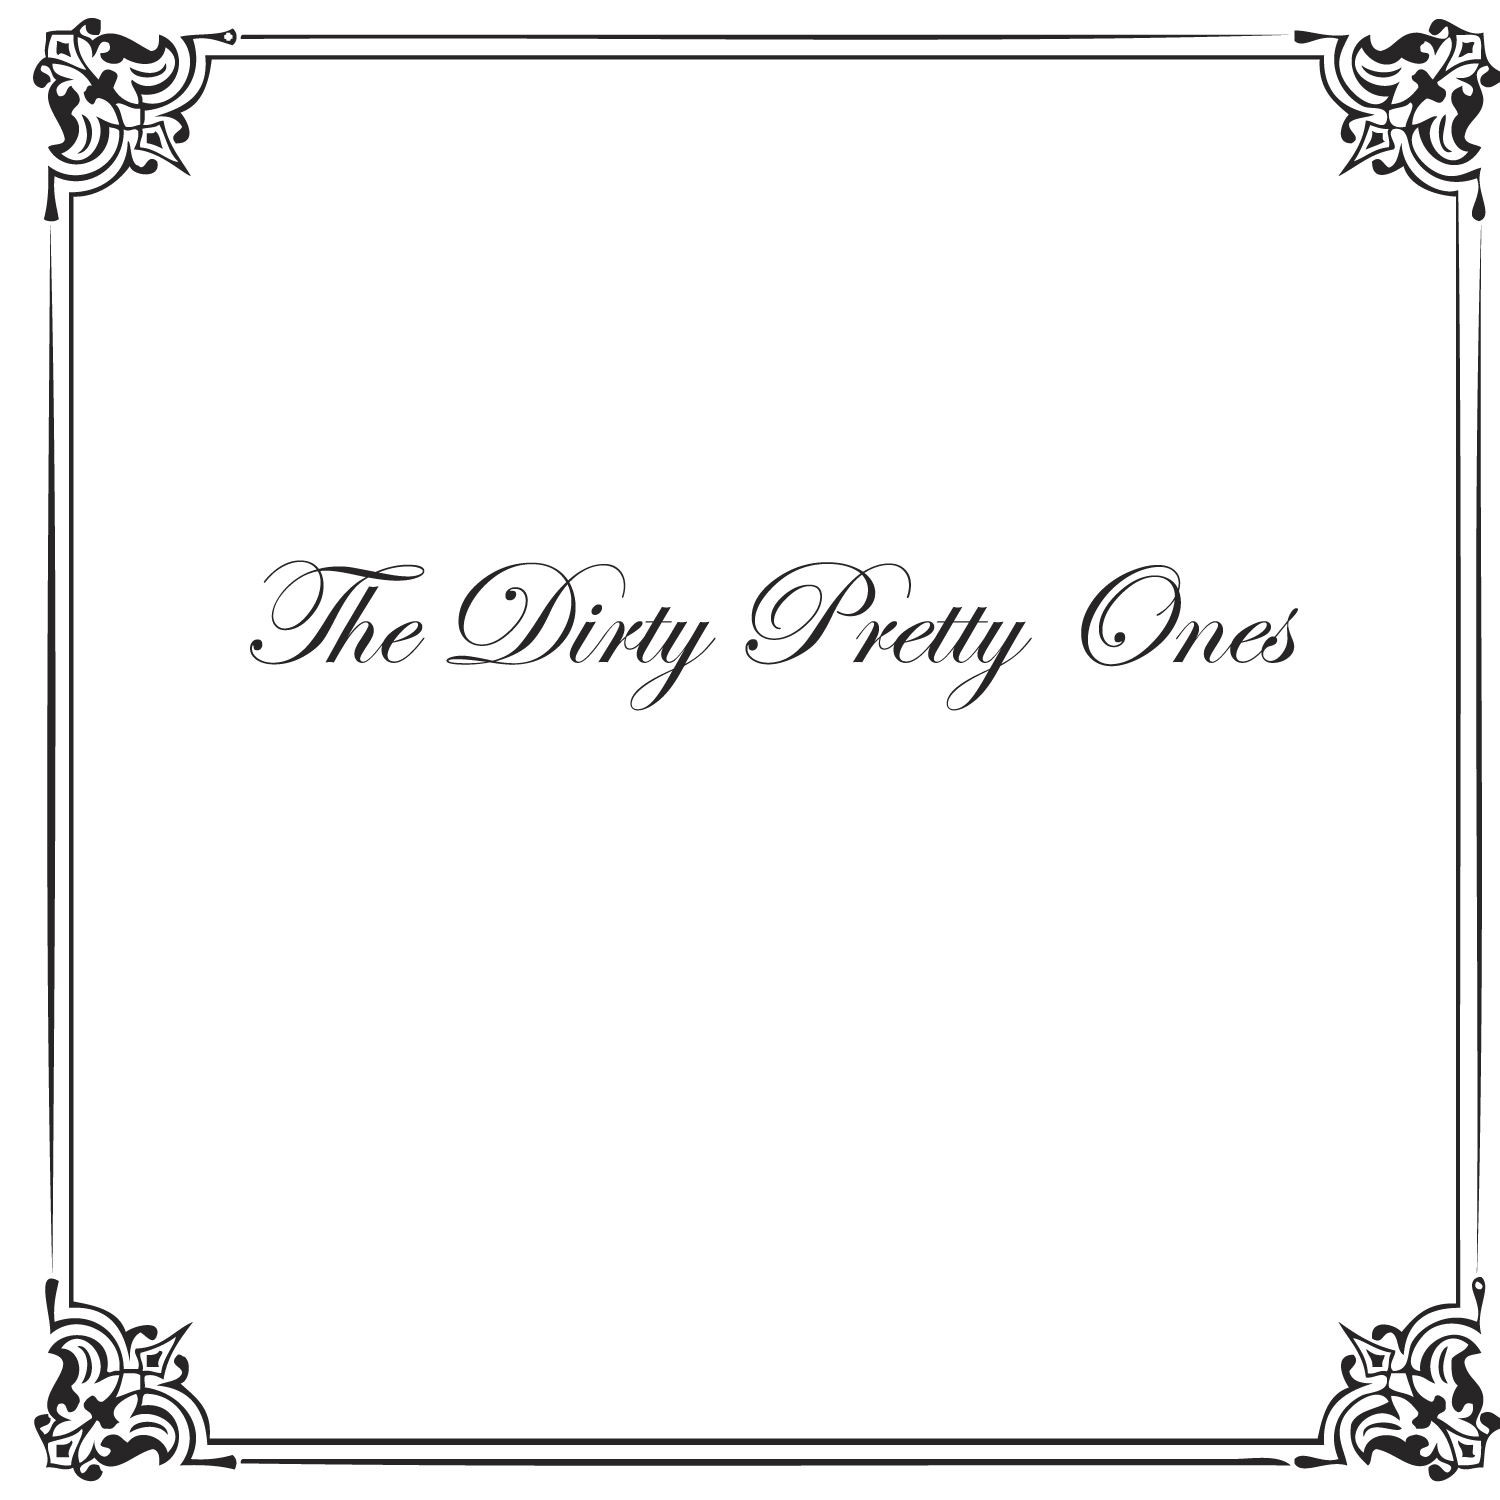 The Dirty Pretty Ones - EP